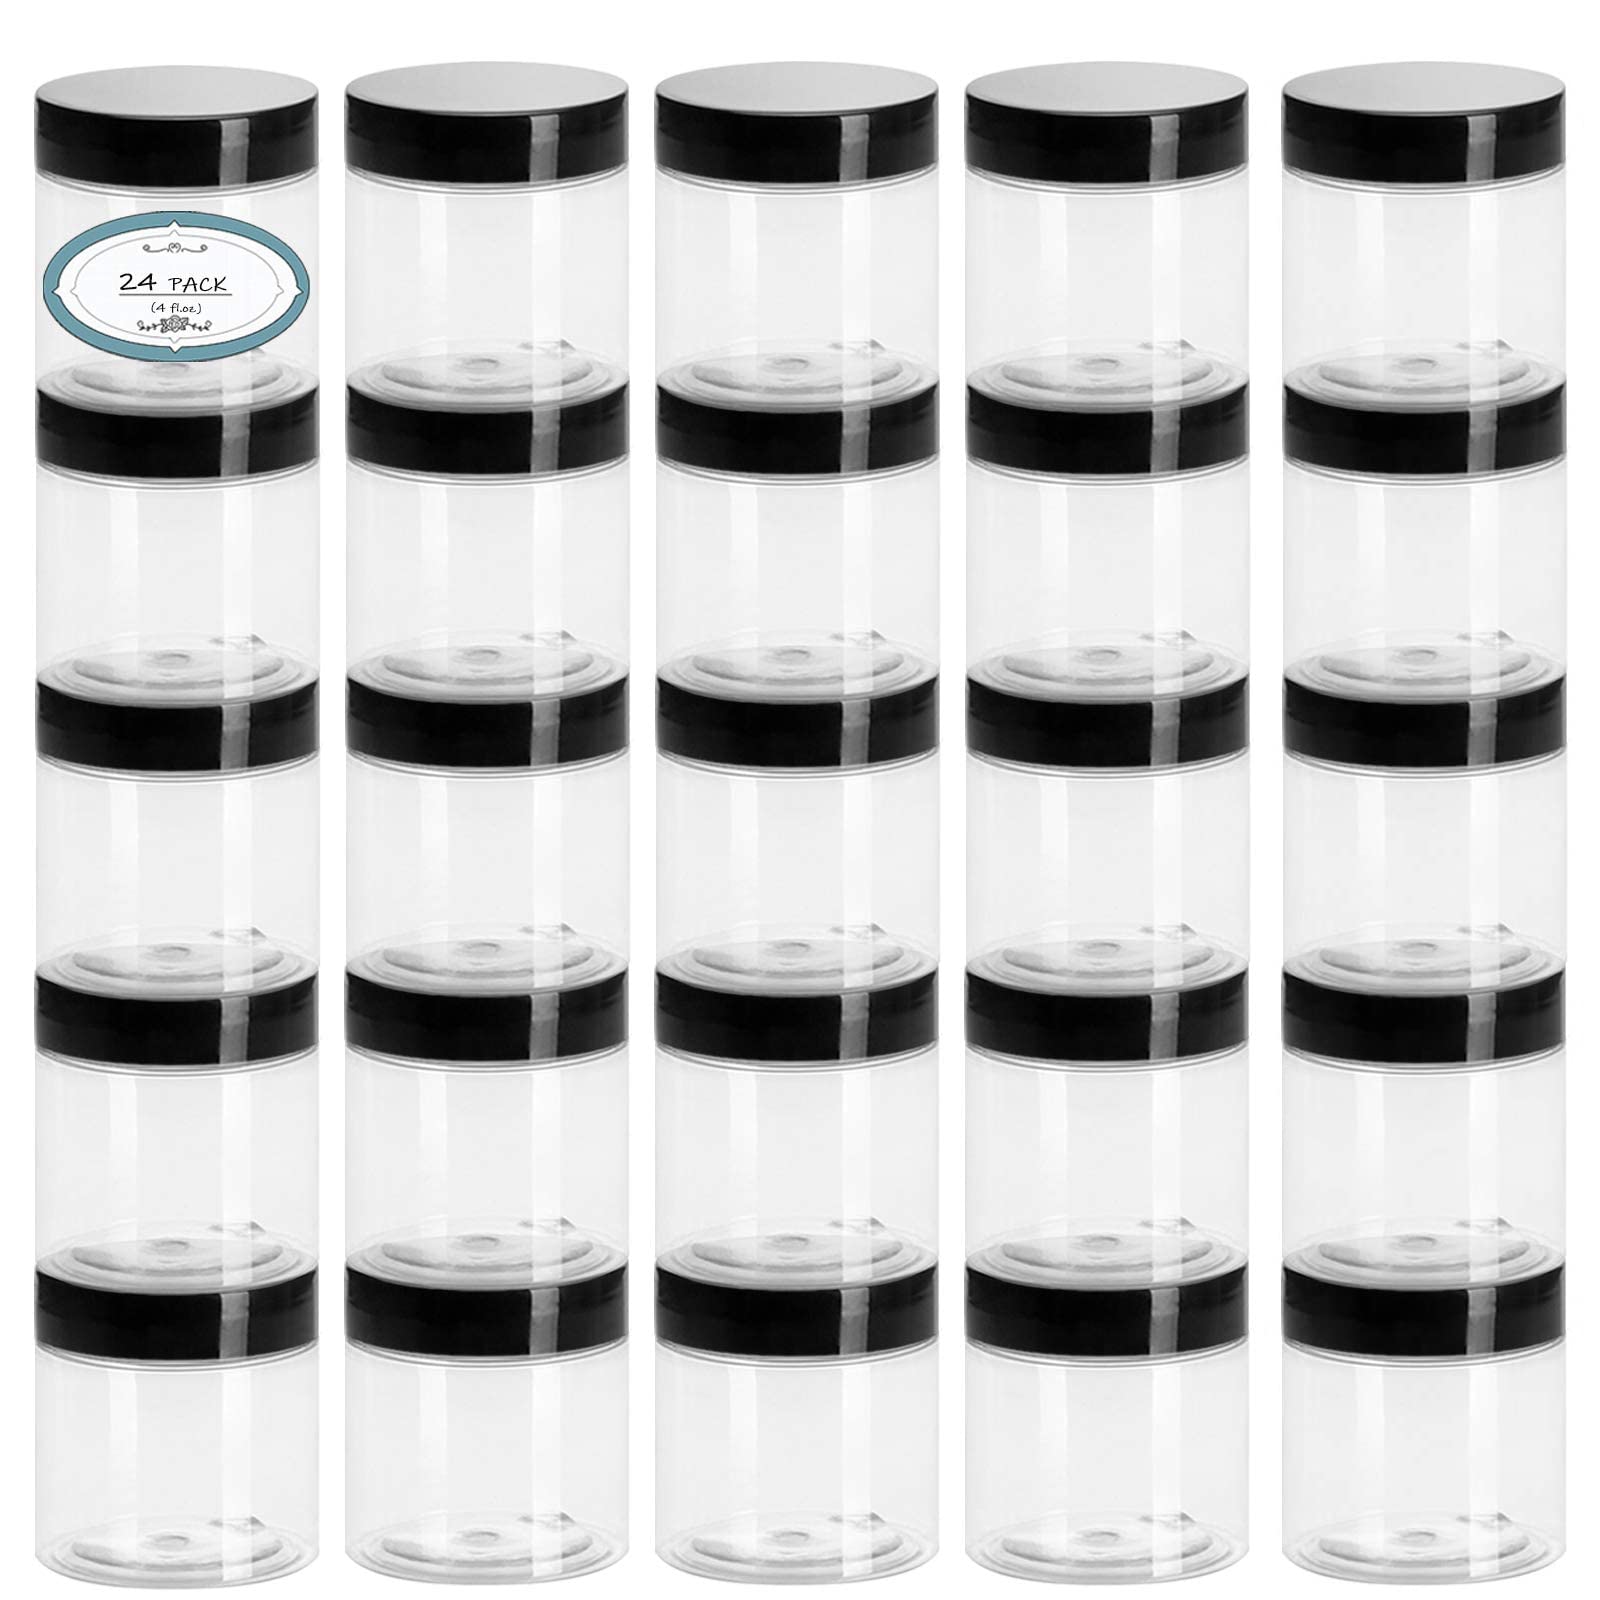 Houseables 4 Oz Plastic Containers with Lids, Body Butter Jars, Lotion  Container, White, 118 ML/Gram Capacity, 12 Pack, Jar for Cream, Makeup